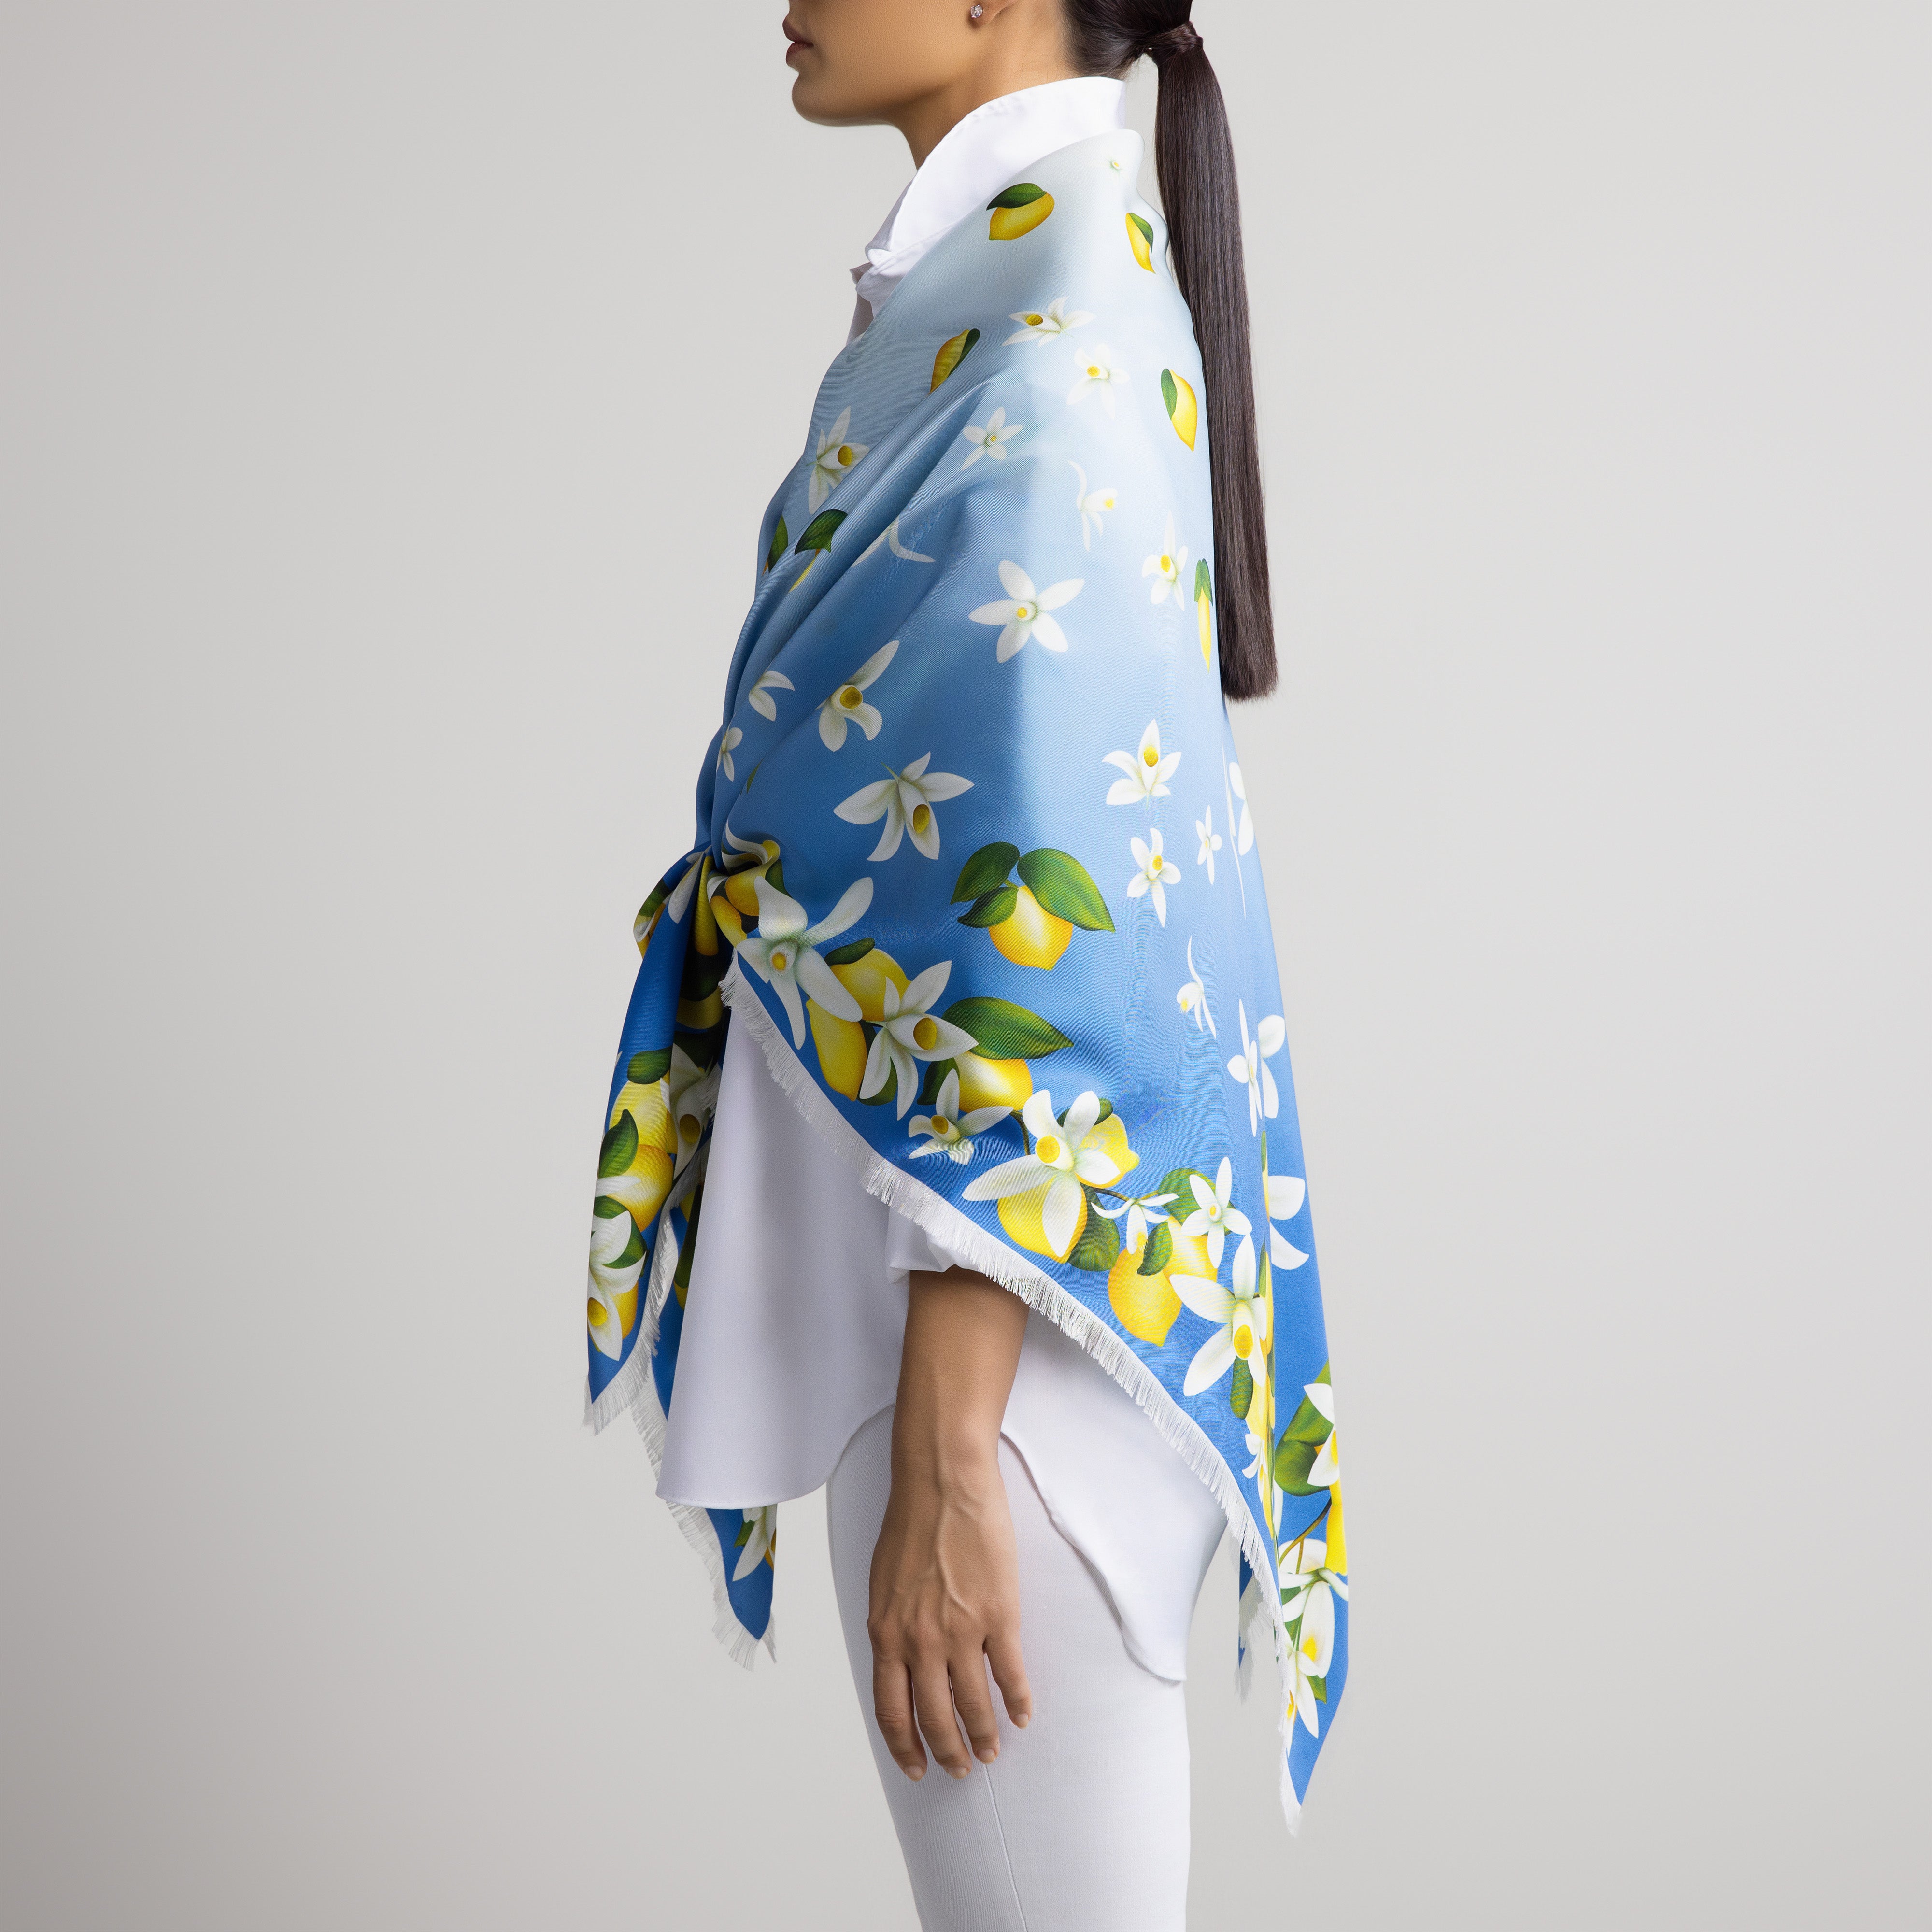 Capri Grande Silk Scarf in Sky Blue with Hand-Feathered Edges